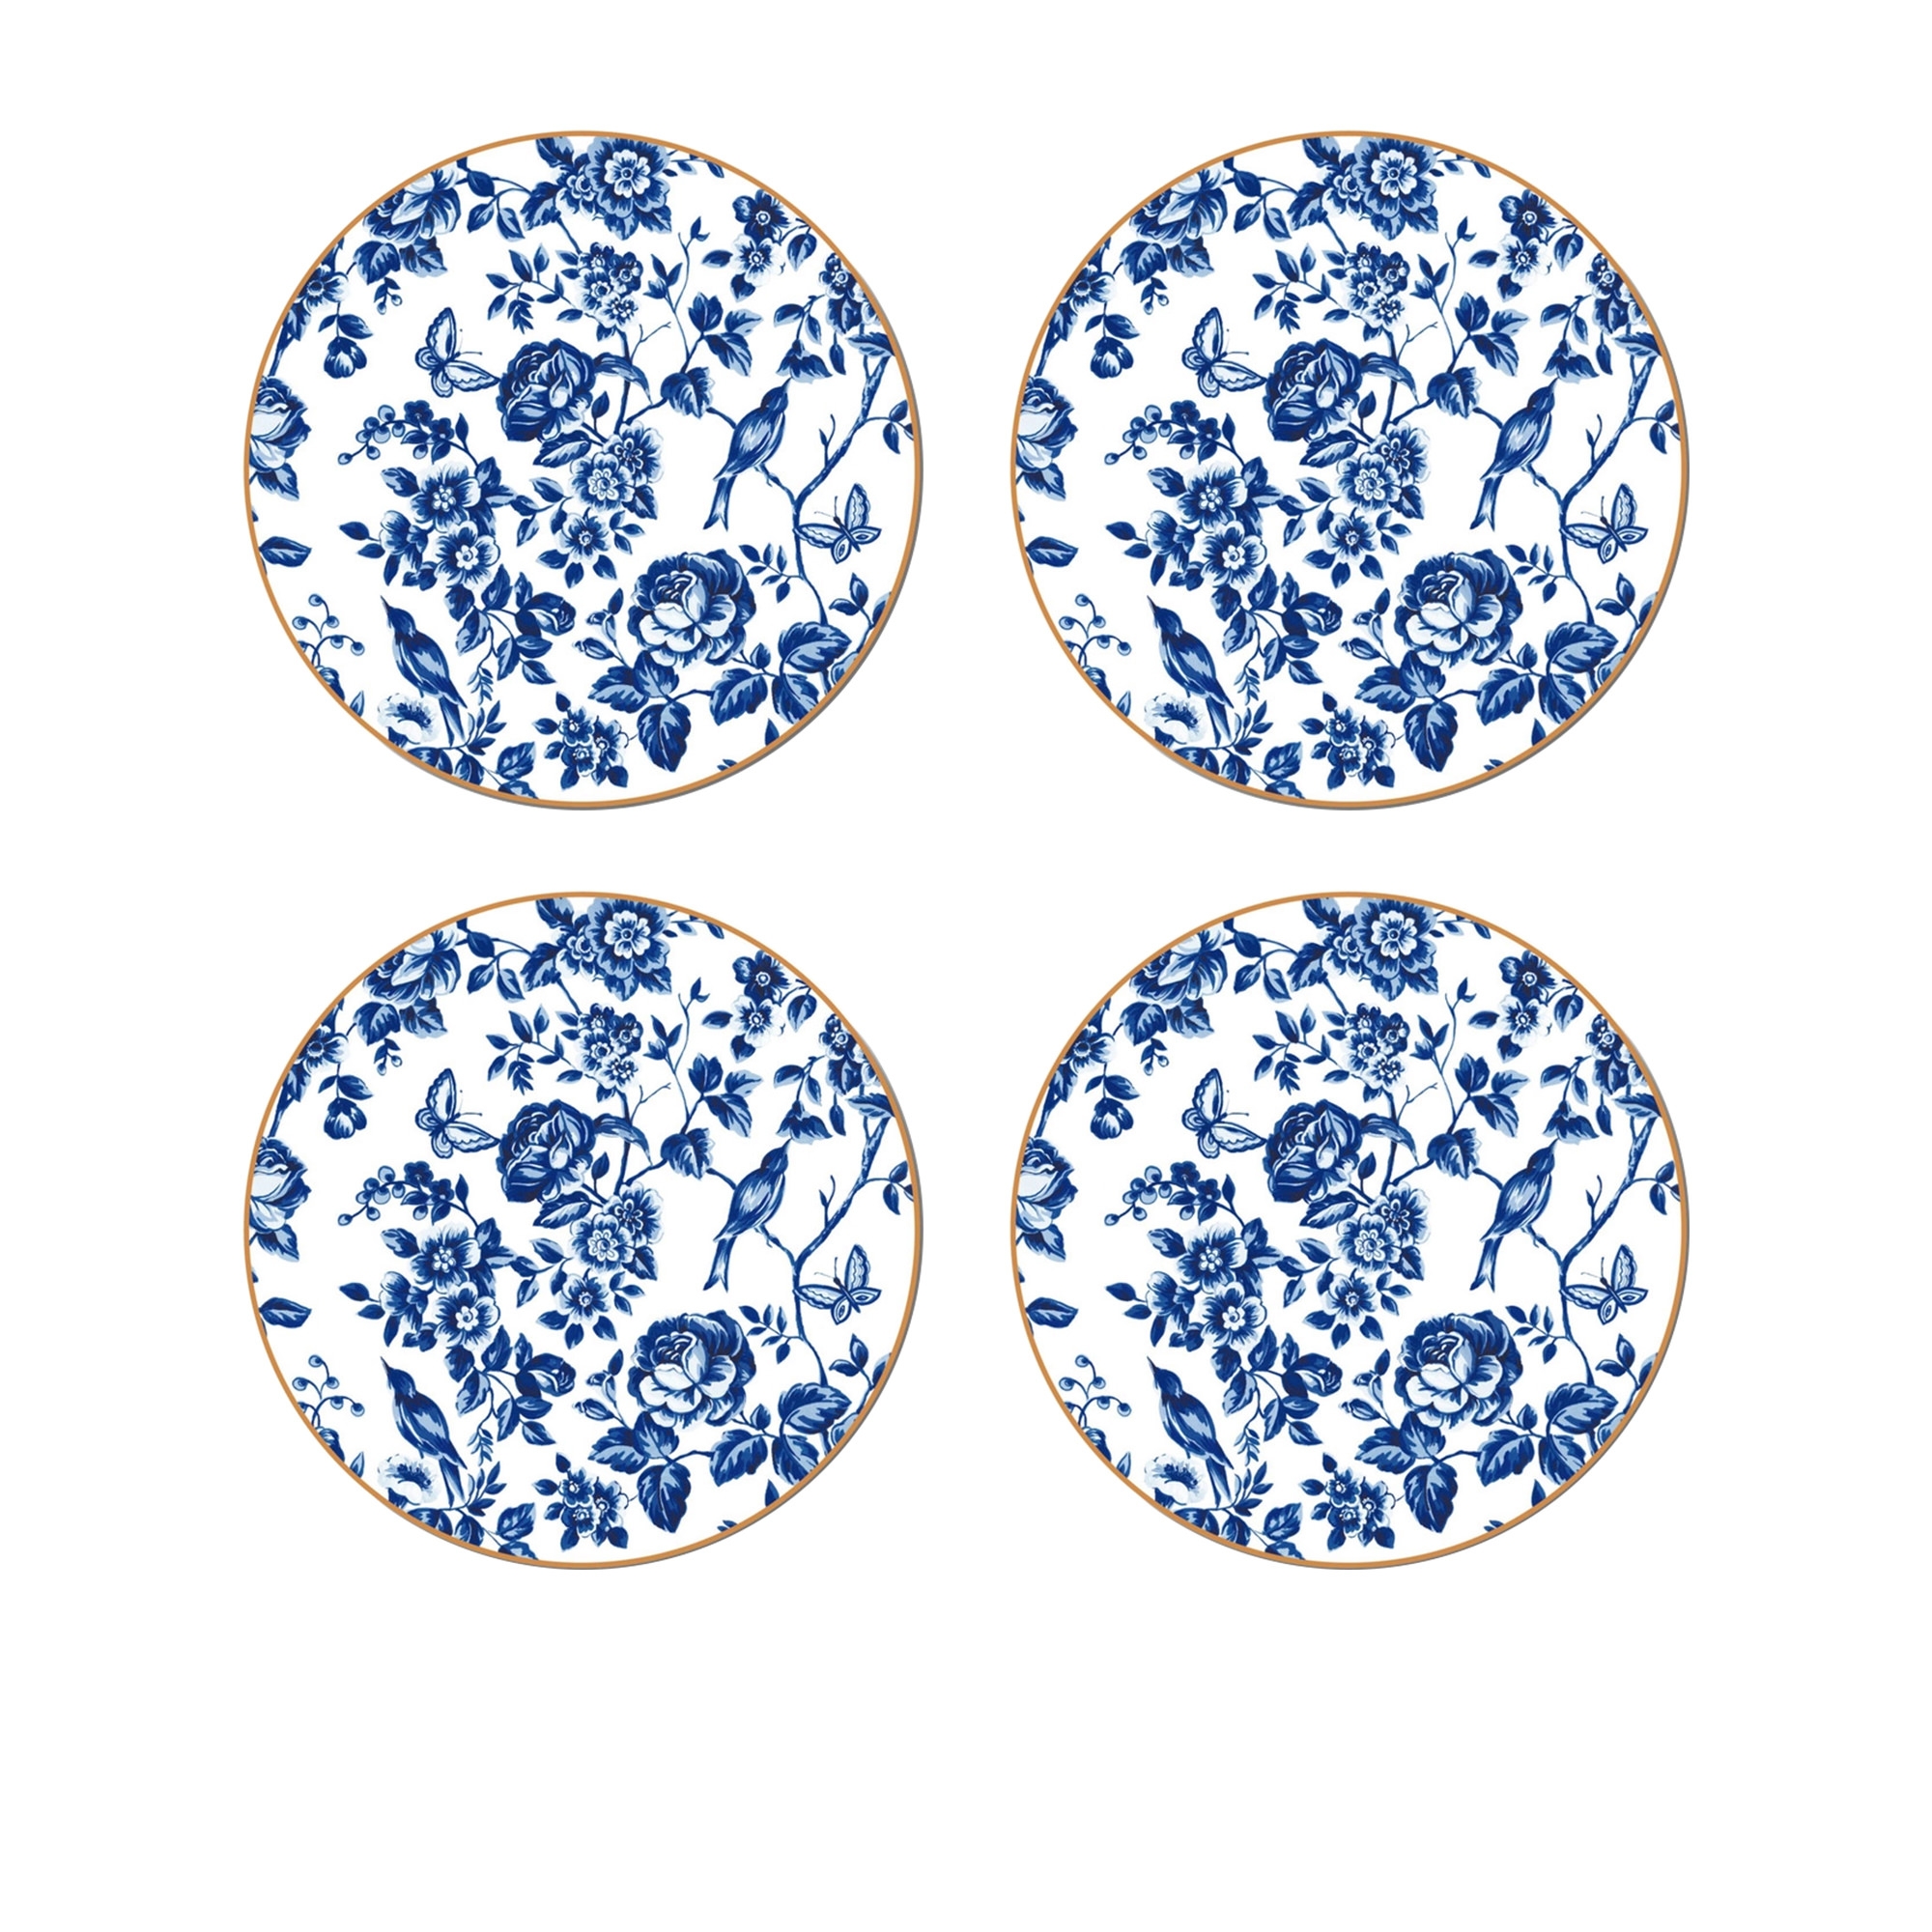 Cinnamon Round Placemat Set of 4 French Rose Toile Image 1